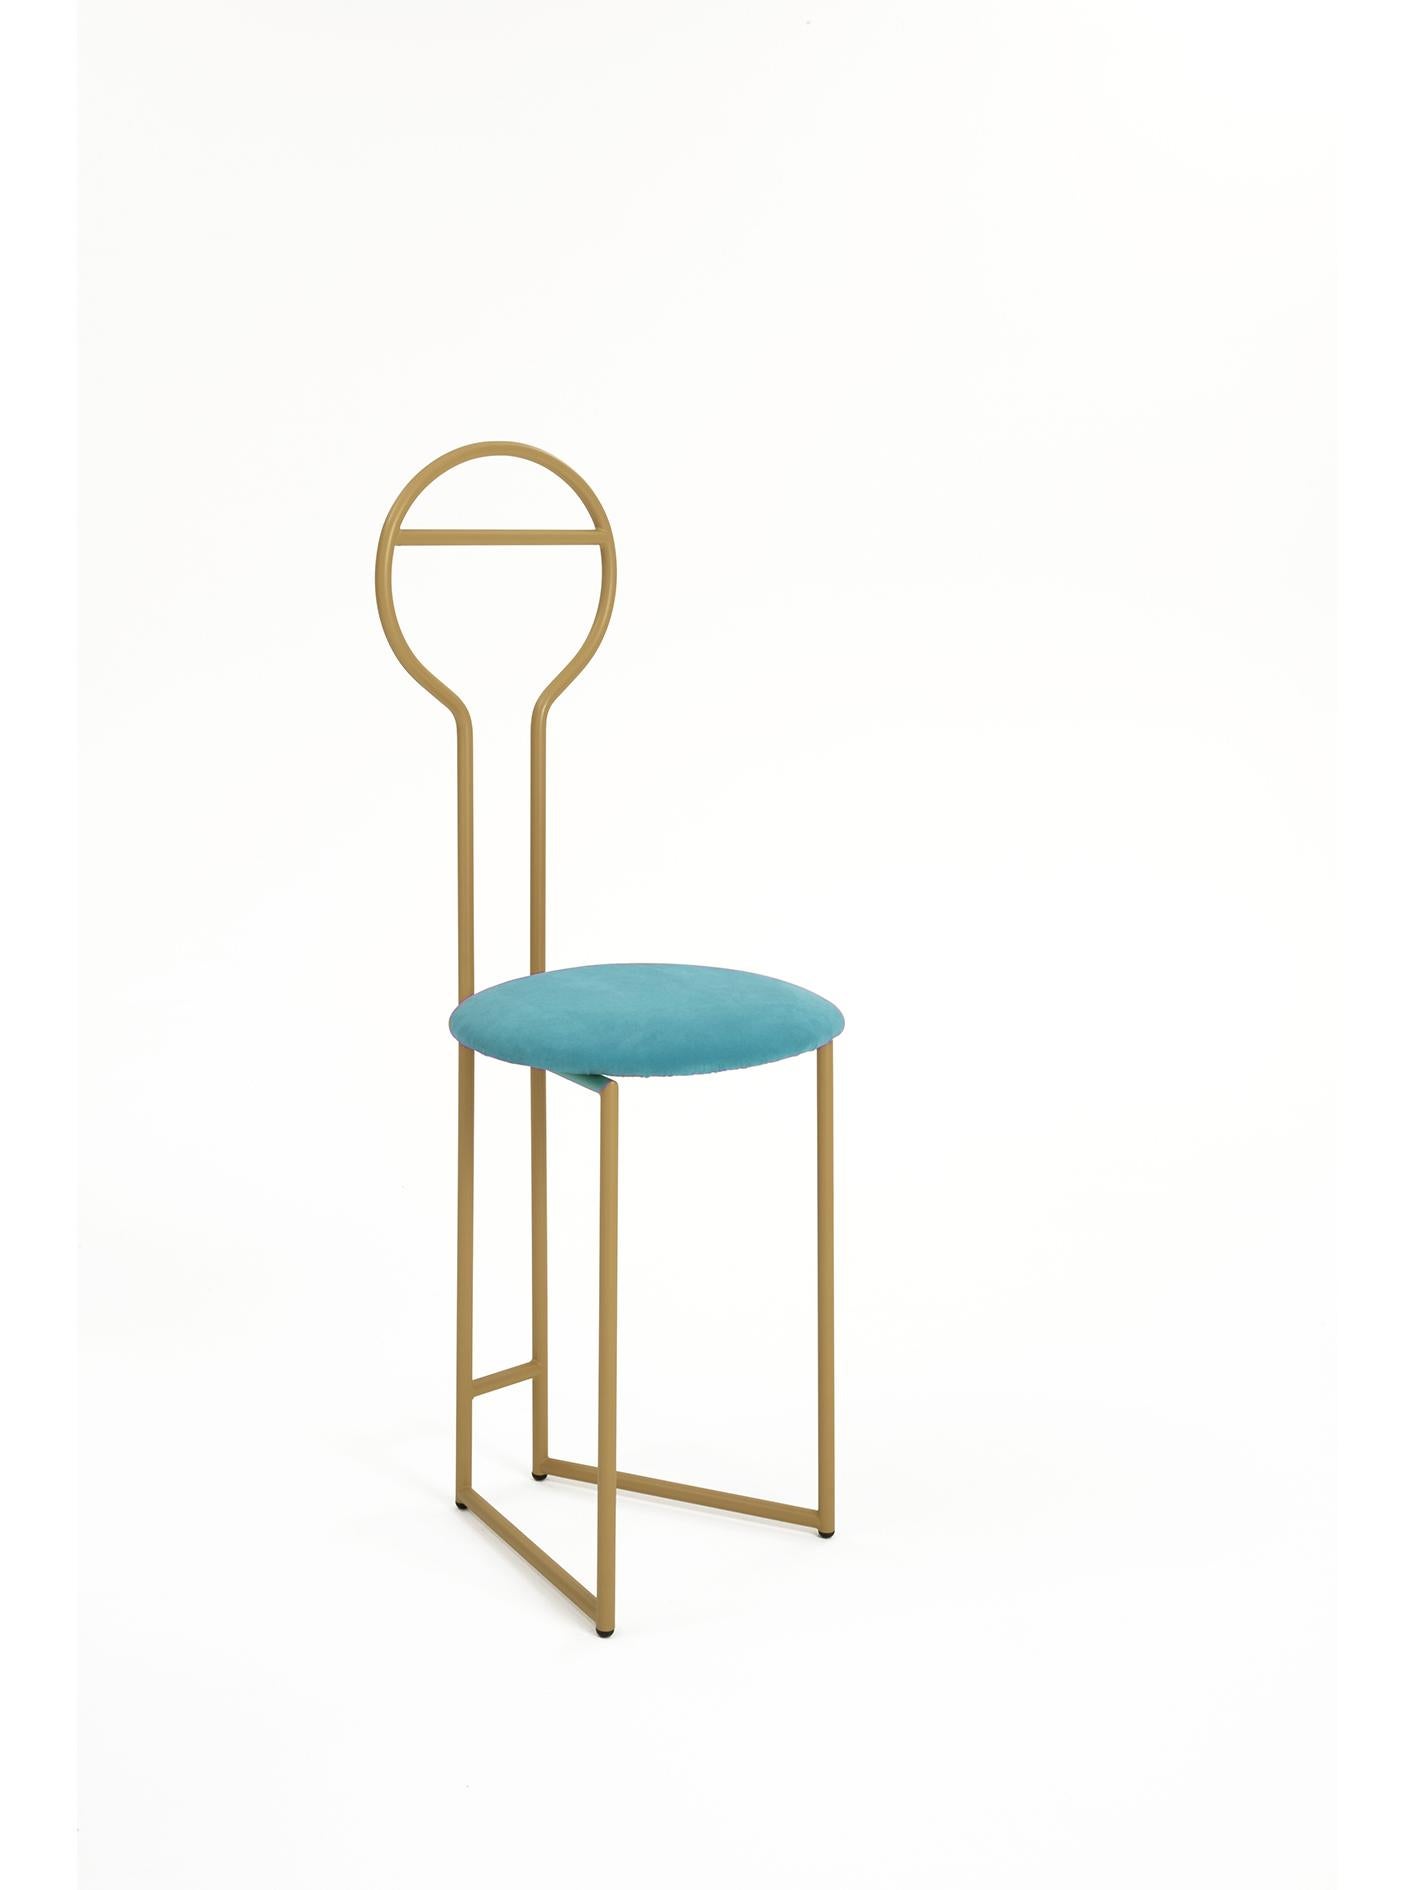 Joly Chairdrobe design Lorenz + Kaz, 2019
Made of gold powder-coated metal with padded cushion seat in green velvet fire class E1 (the listed version). Available in 4 different fabric categories, including linen, felt, leather, eco-leather,